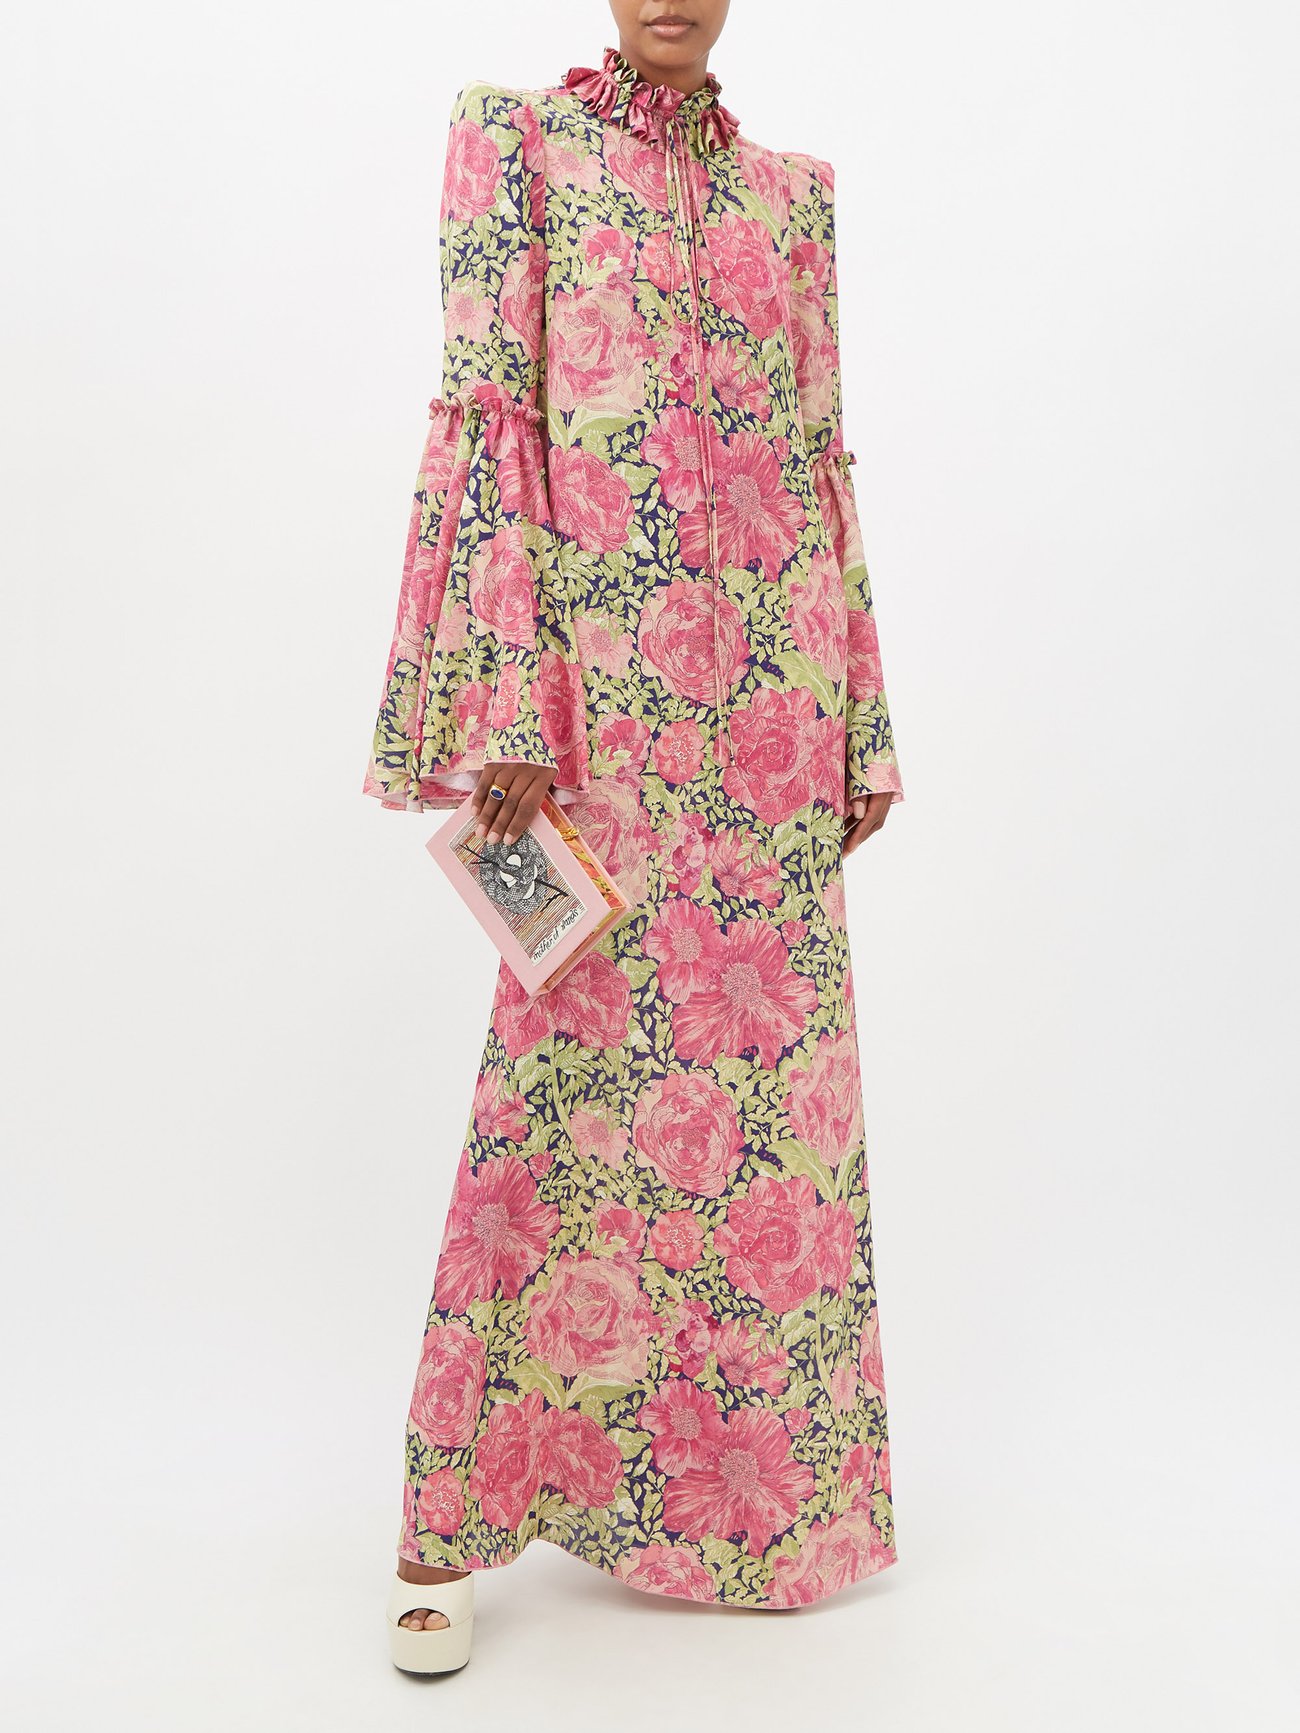 The Vampire's Wife's pink floral maxi dress is made from crepe patterned with blooming roses and shaped with a ruffled high neck, alongside long loose flared sleeves.